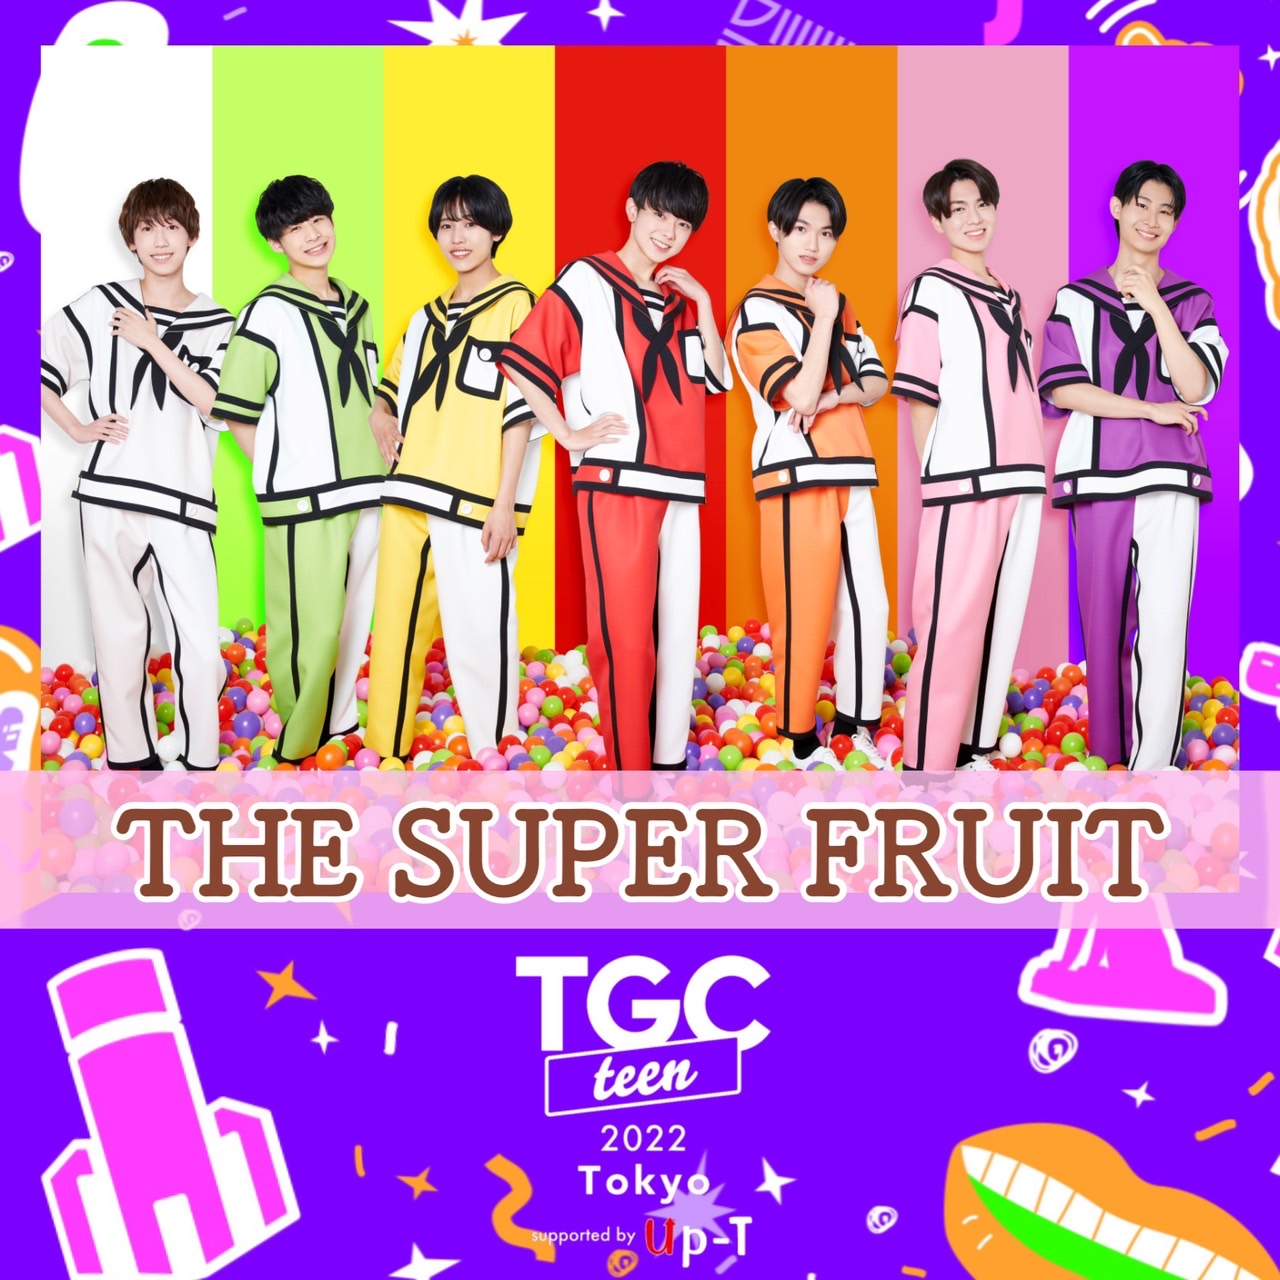 【NEWS】11月13日(日)開催「TGC teen 2022 Tokyo supported by Up-T」に出演決定！